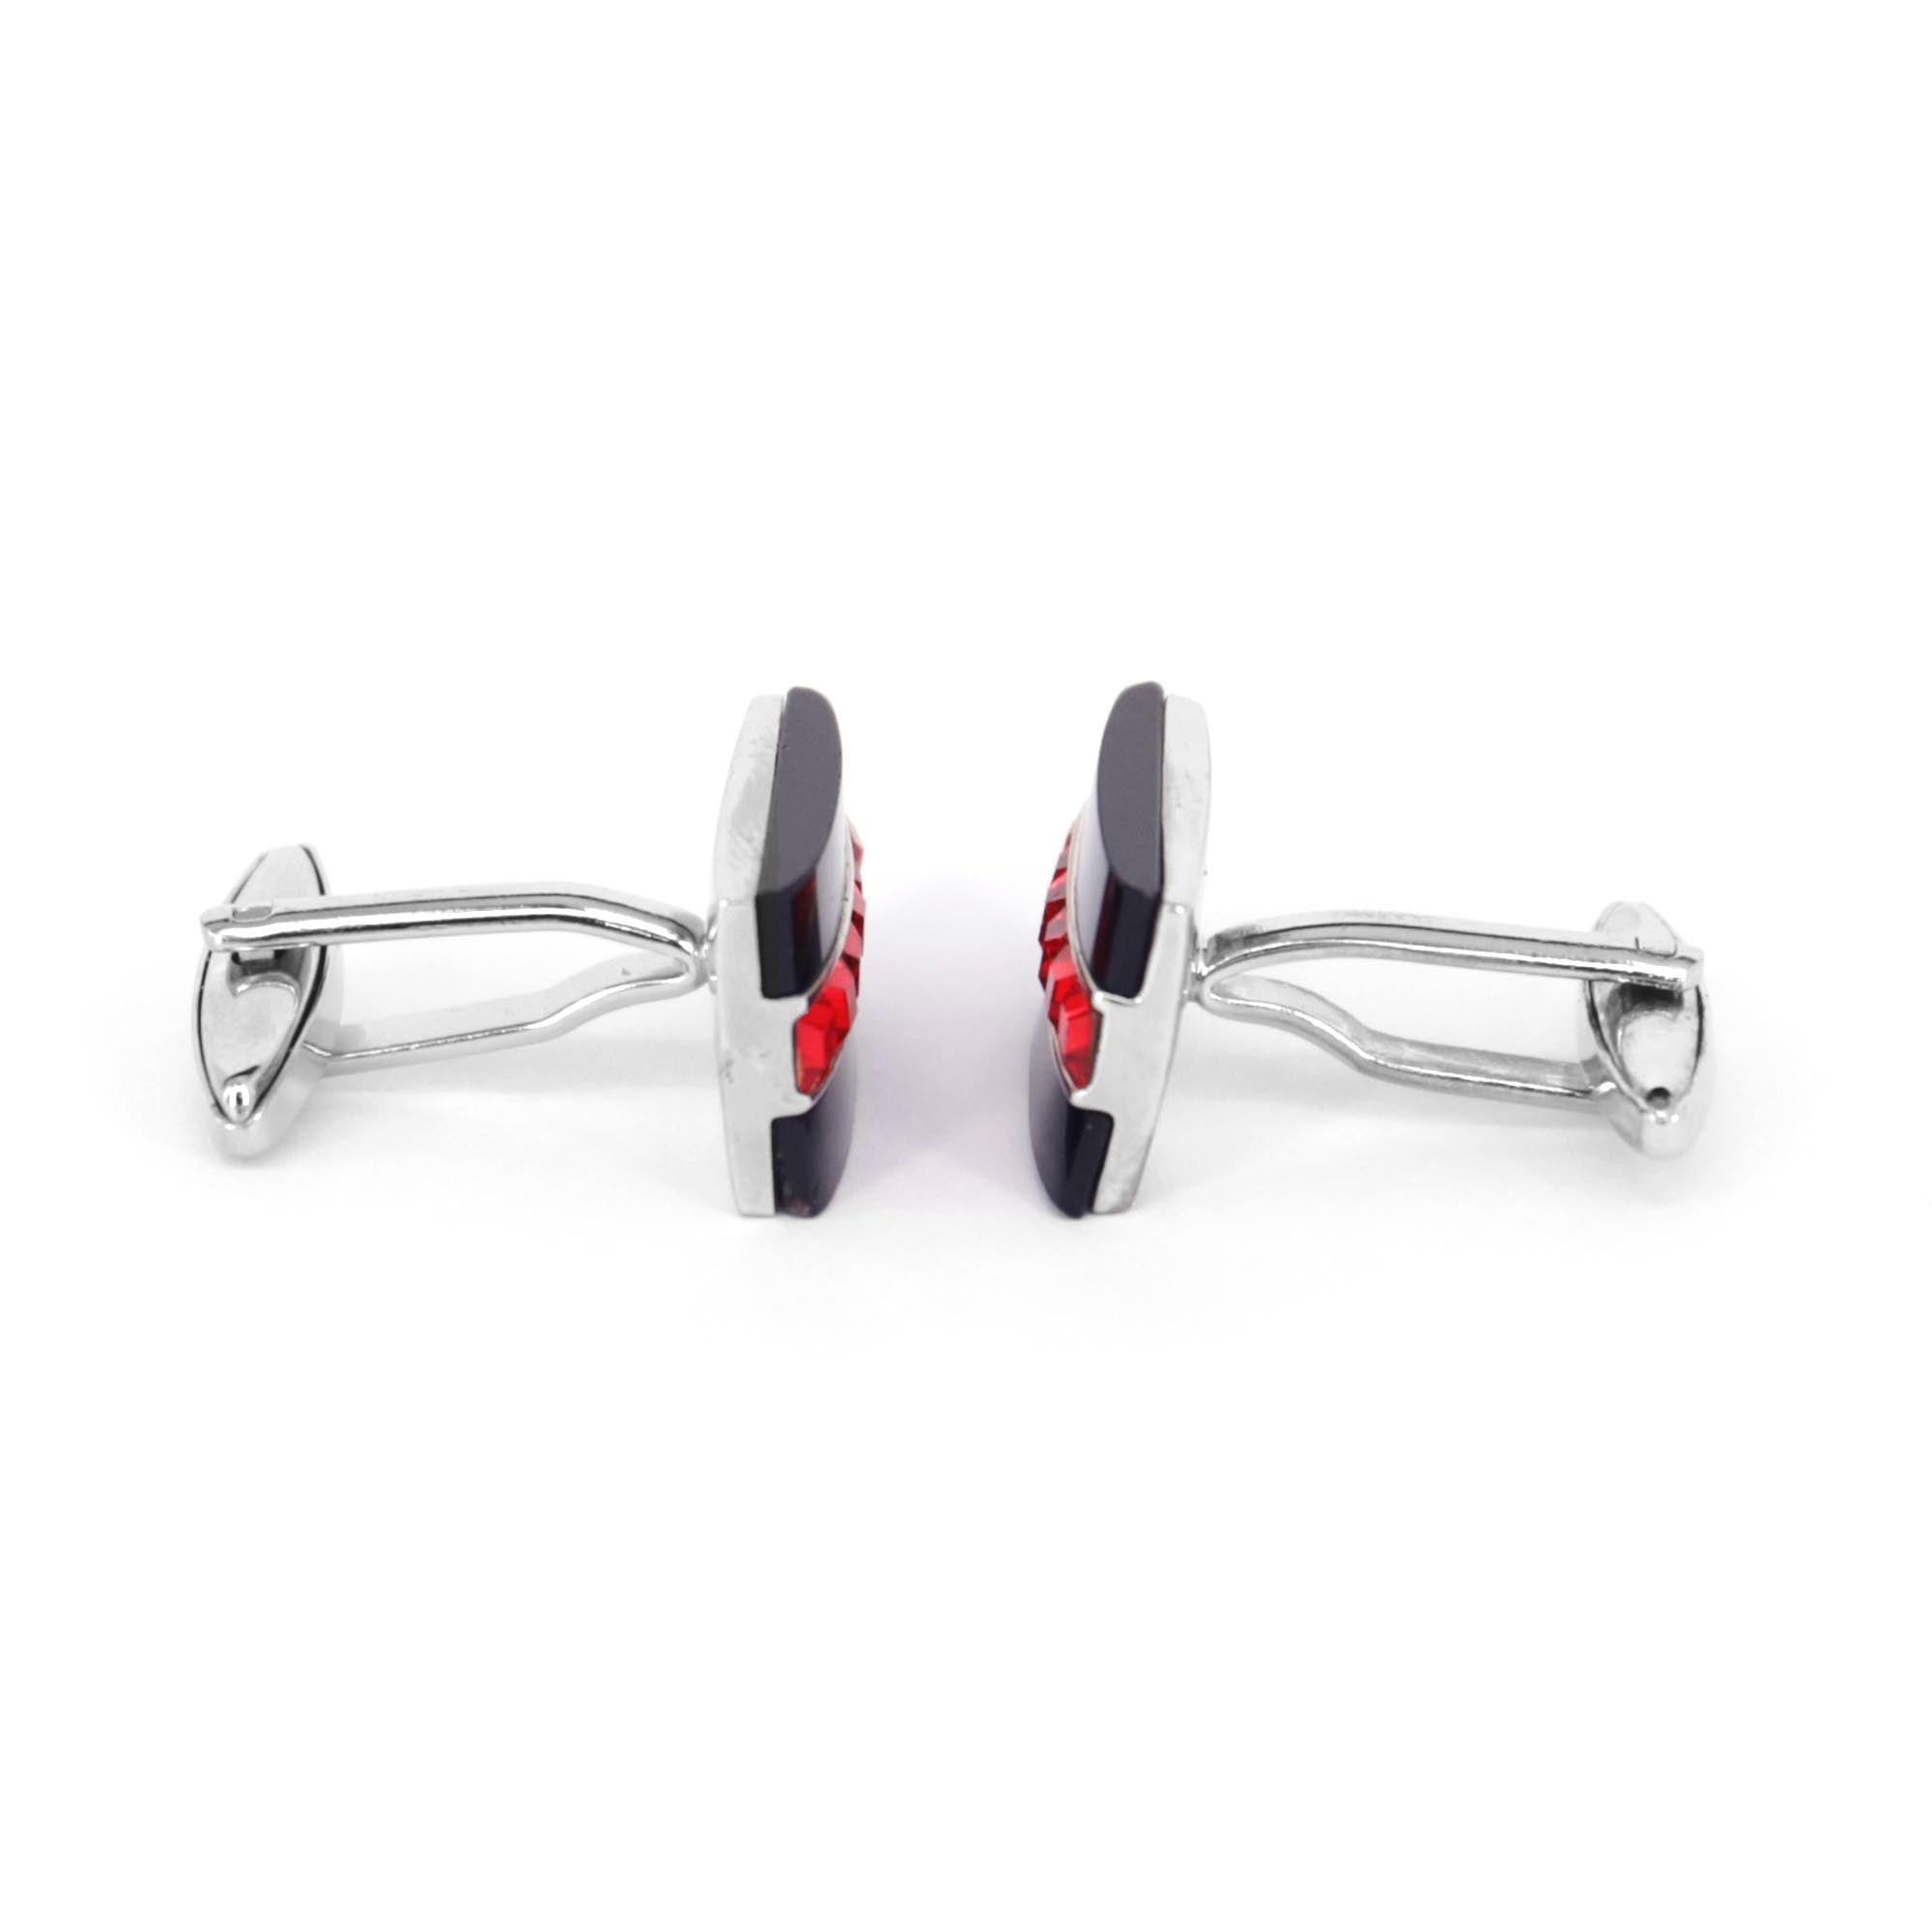 Red Crystal and White/Black Fiber glass Rectangle Cufflinks (Online Exclusive)